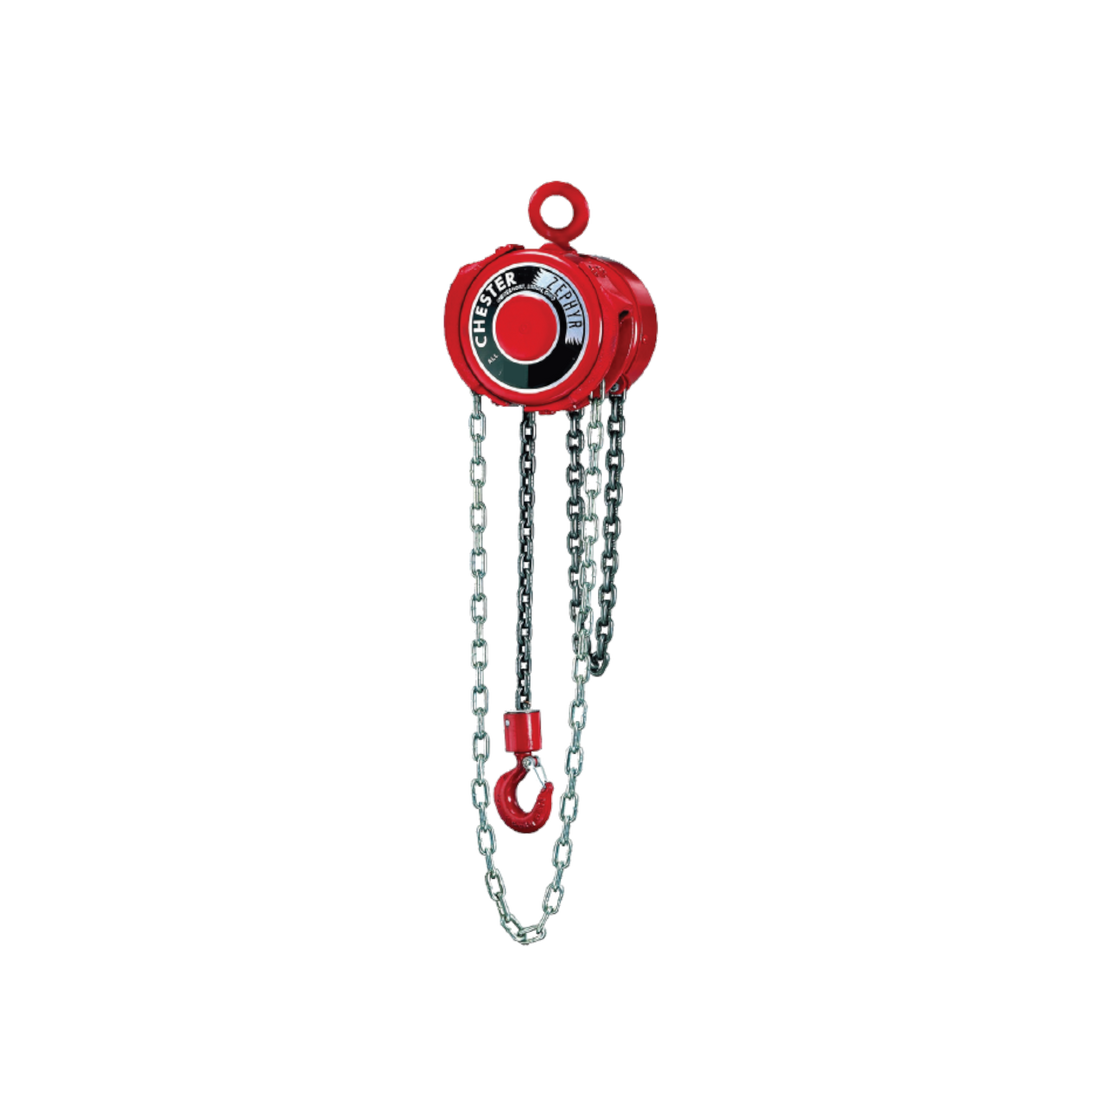 Chester Zephyr Clevis Suspended Hoist Red